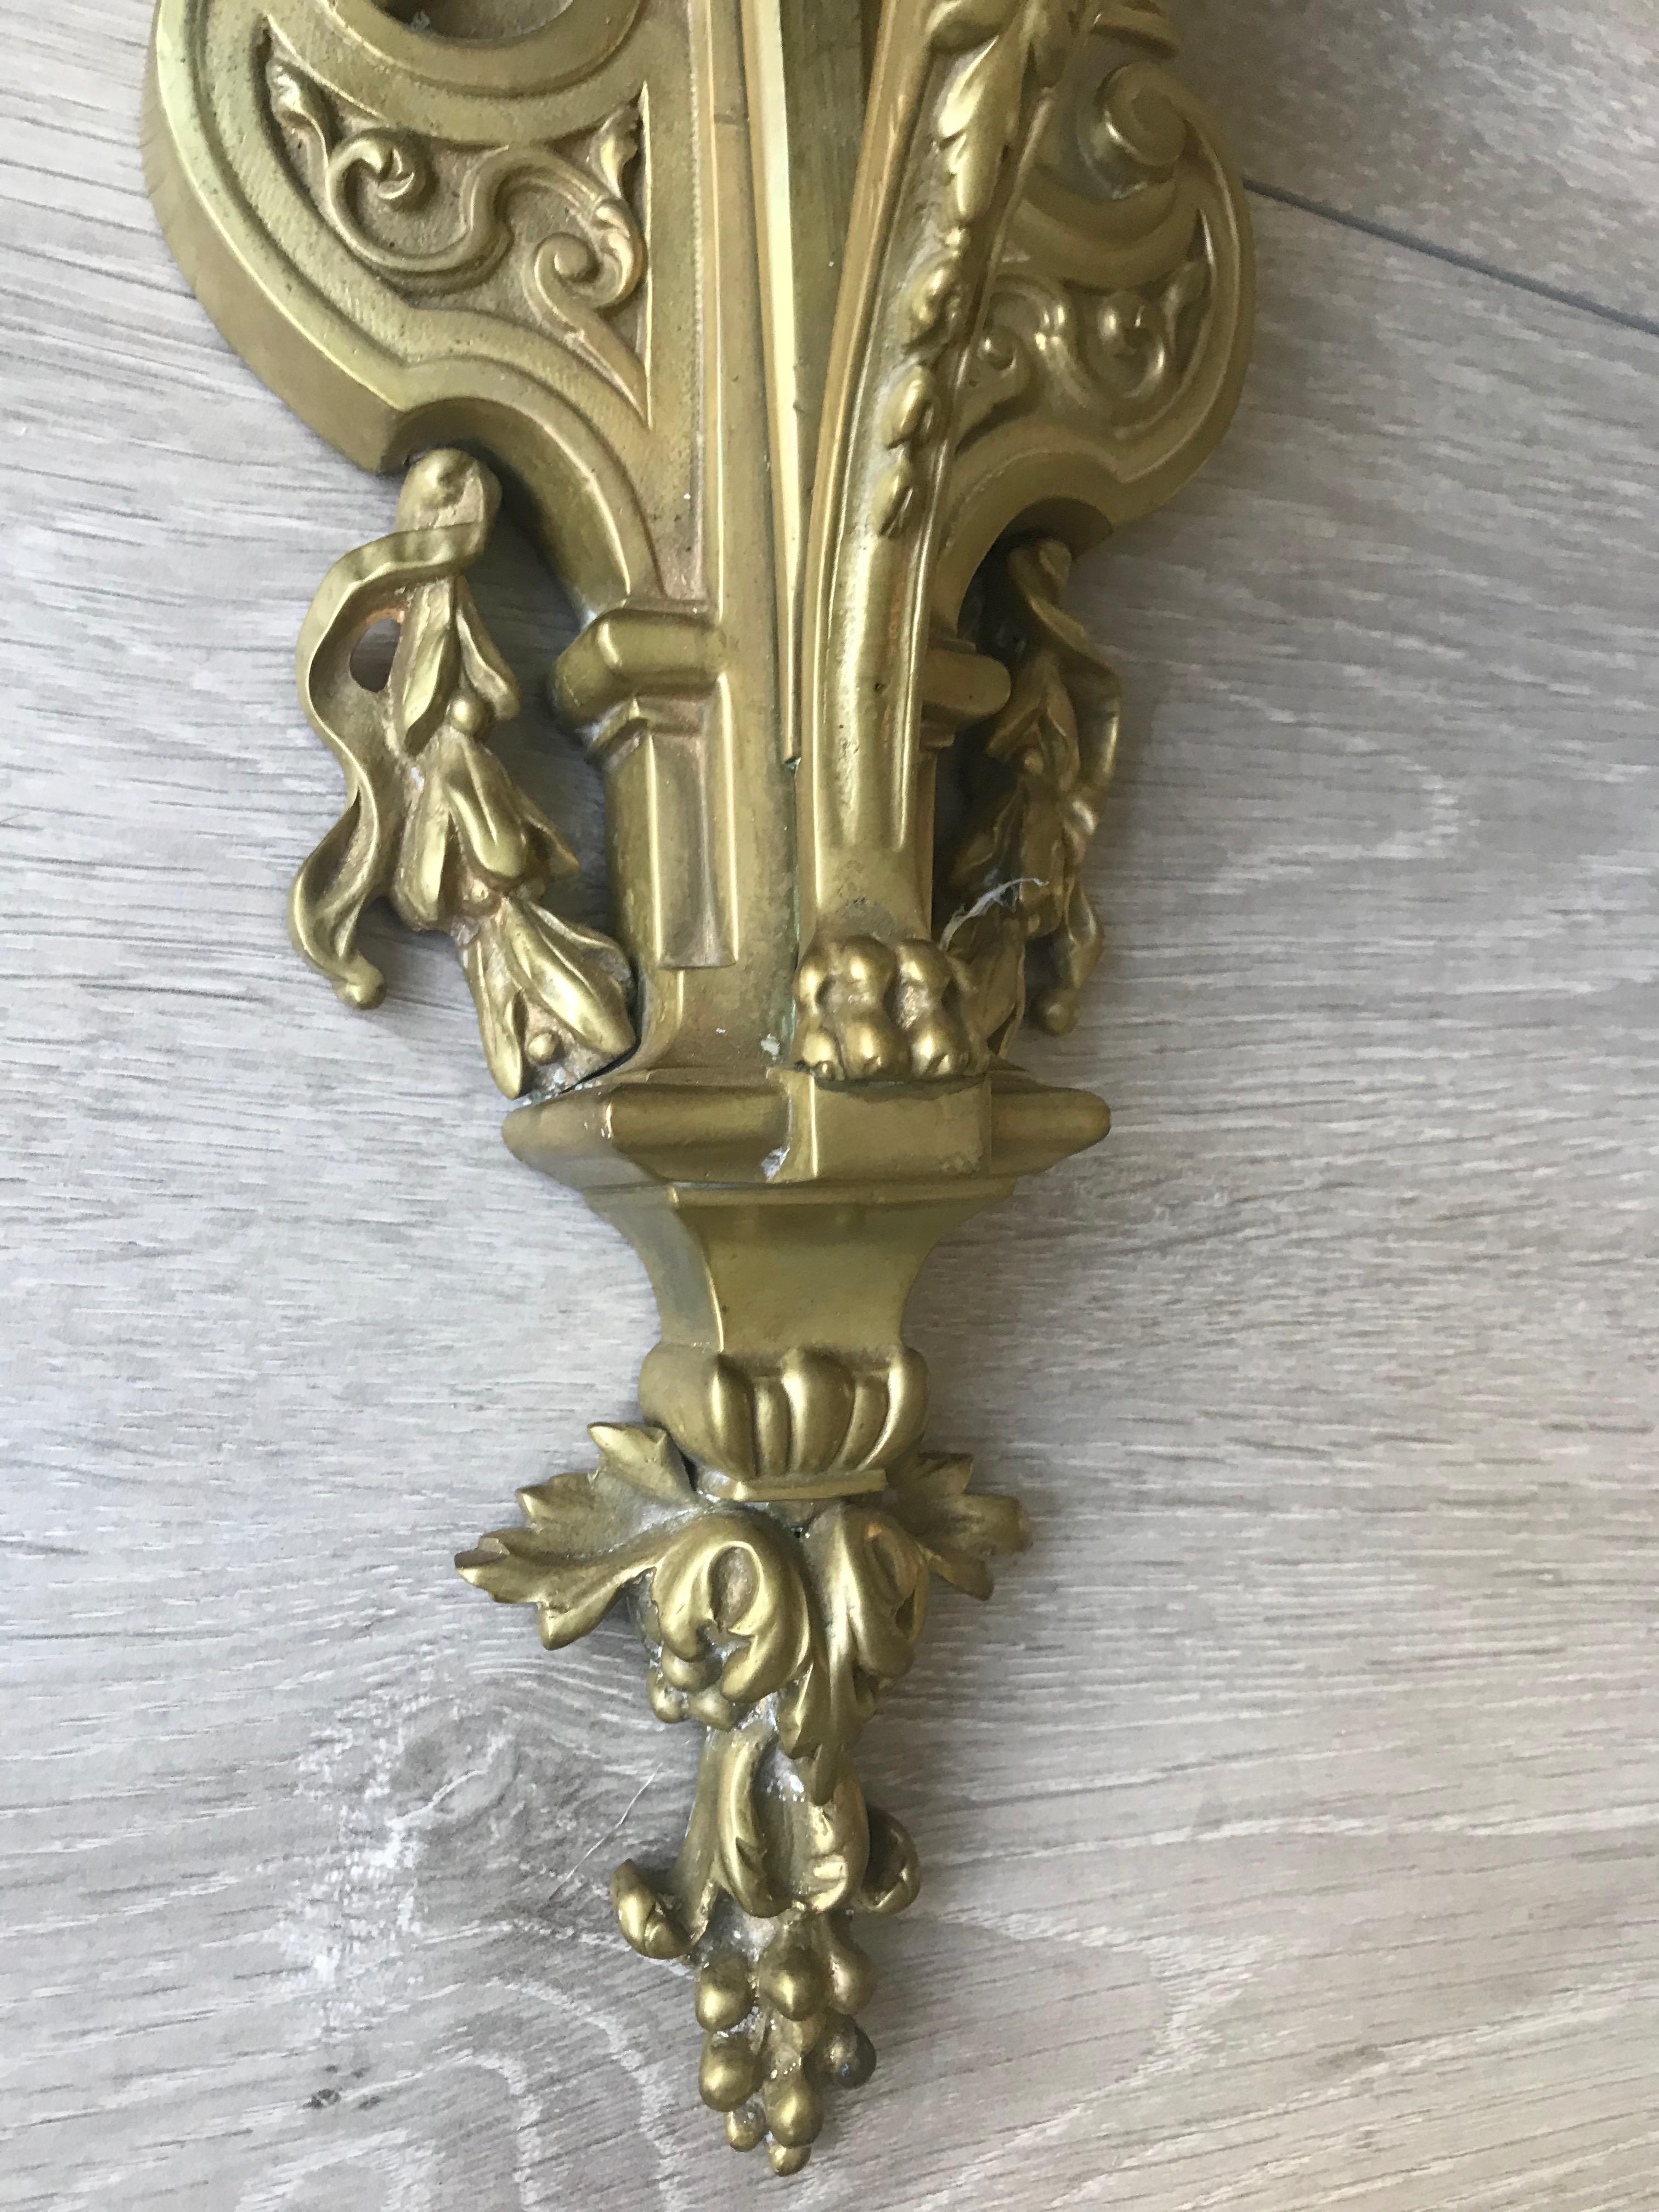 French Stunning & Large Antique Bronze Wall Lamp / Candle Sconce with Goddess Sculpture For Sale